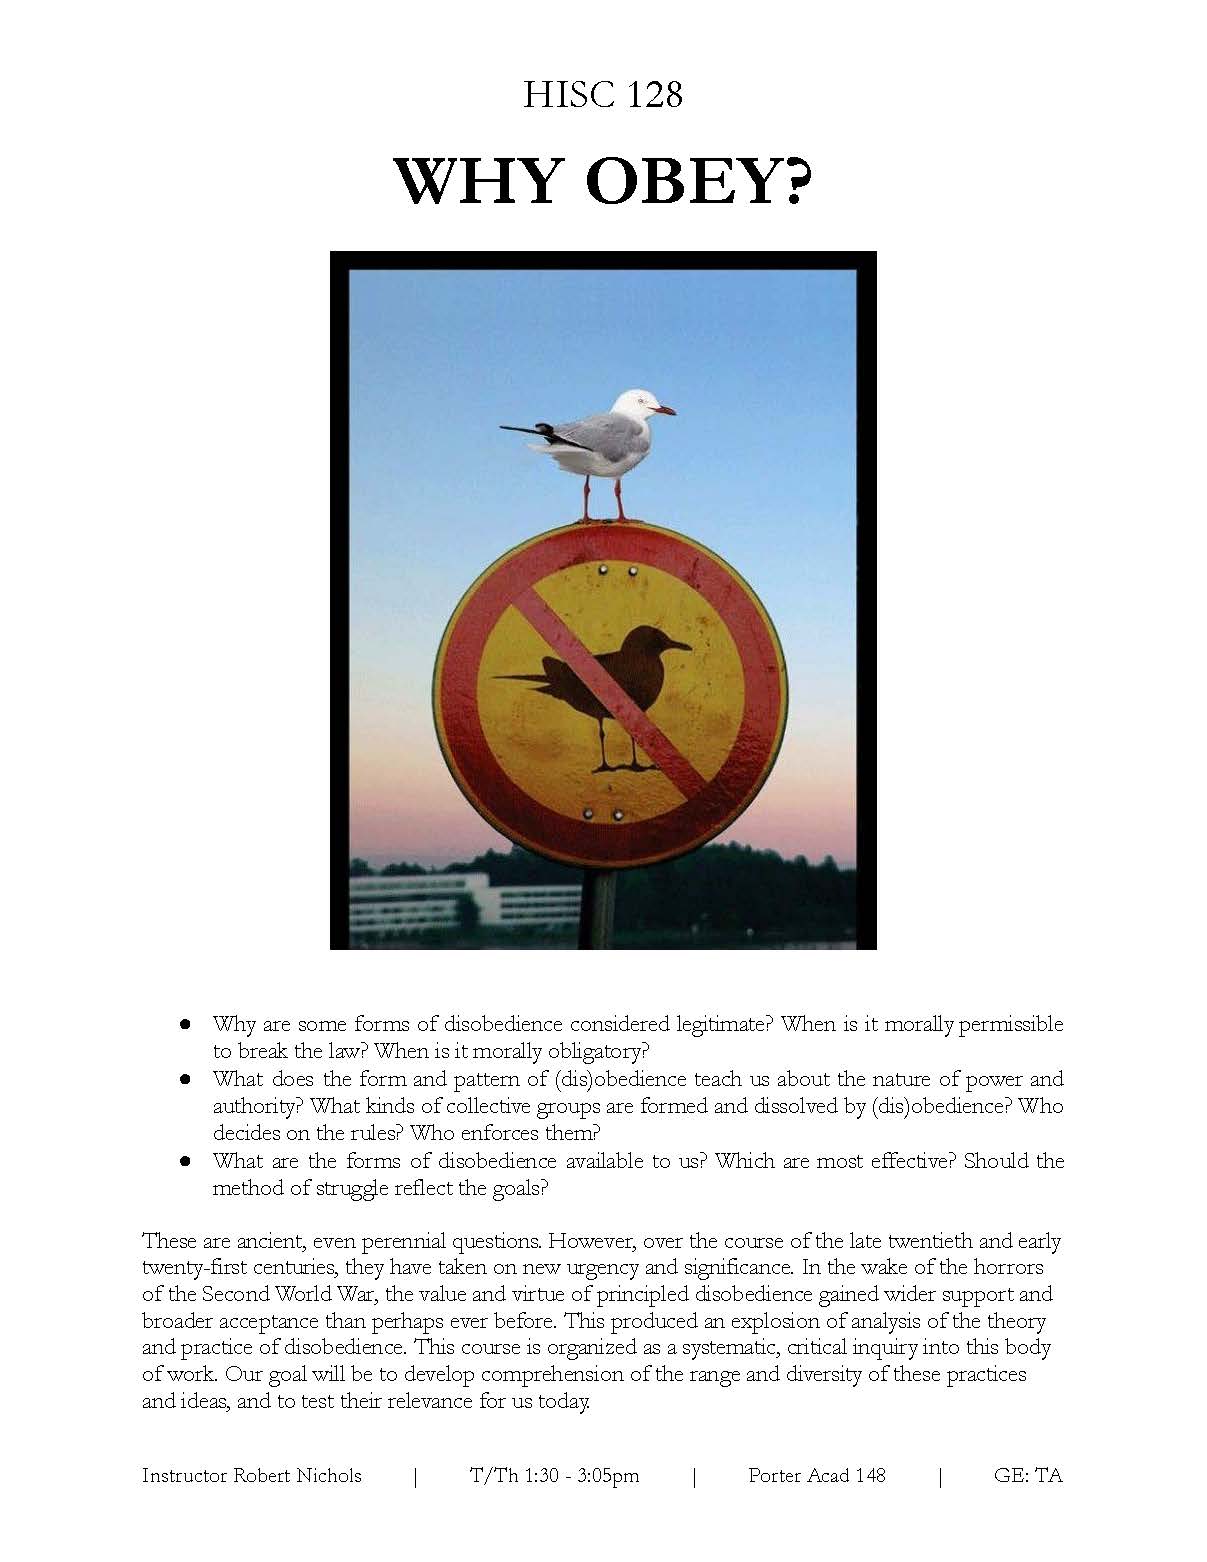 HISC 128: Why Obey?